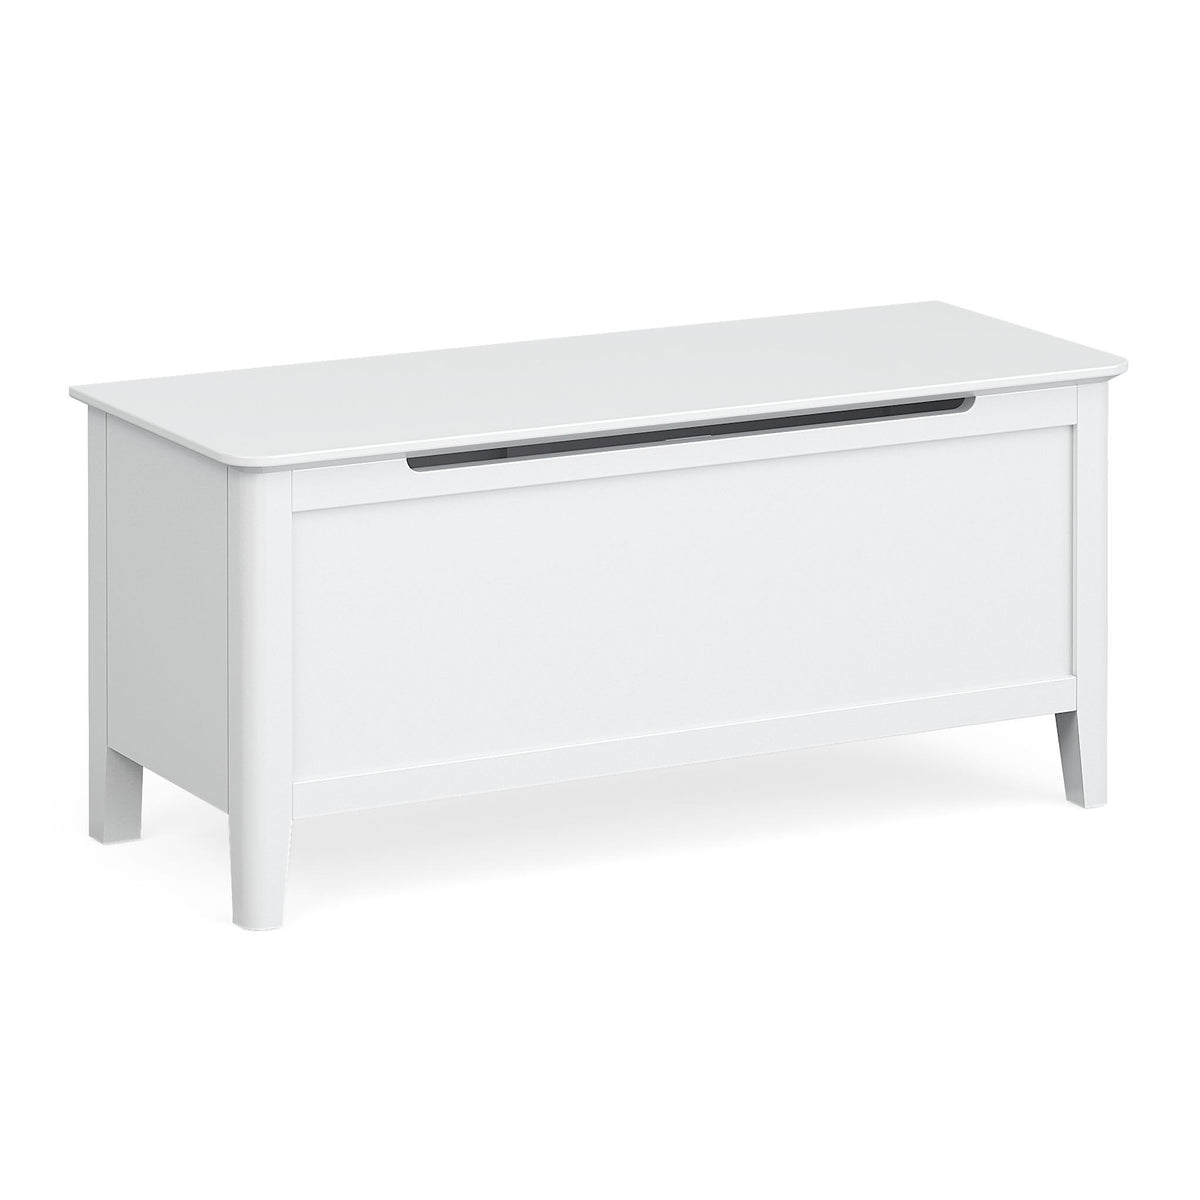 Chester White Blanket Box Ottoman by Roseland Furniture